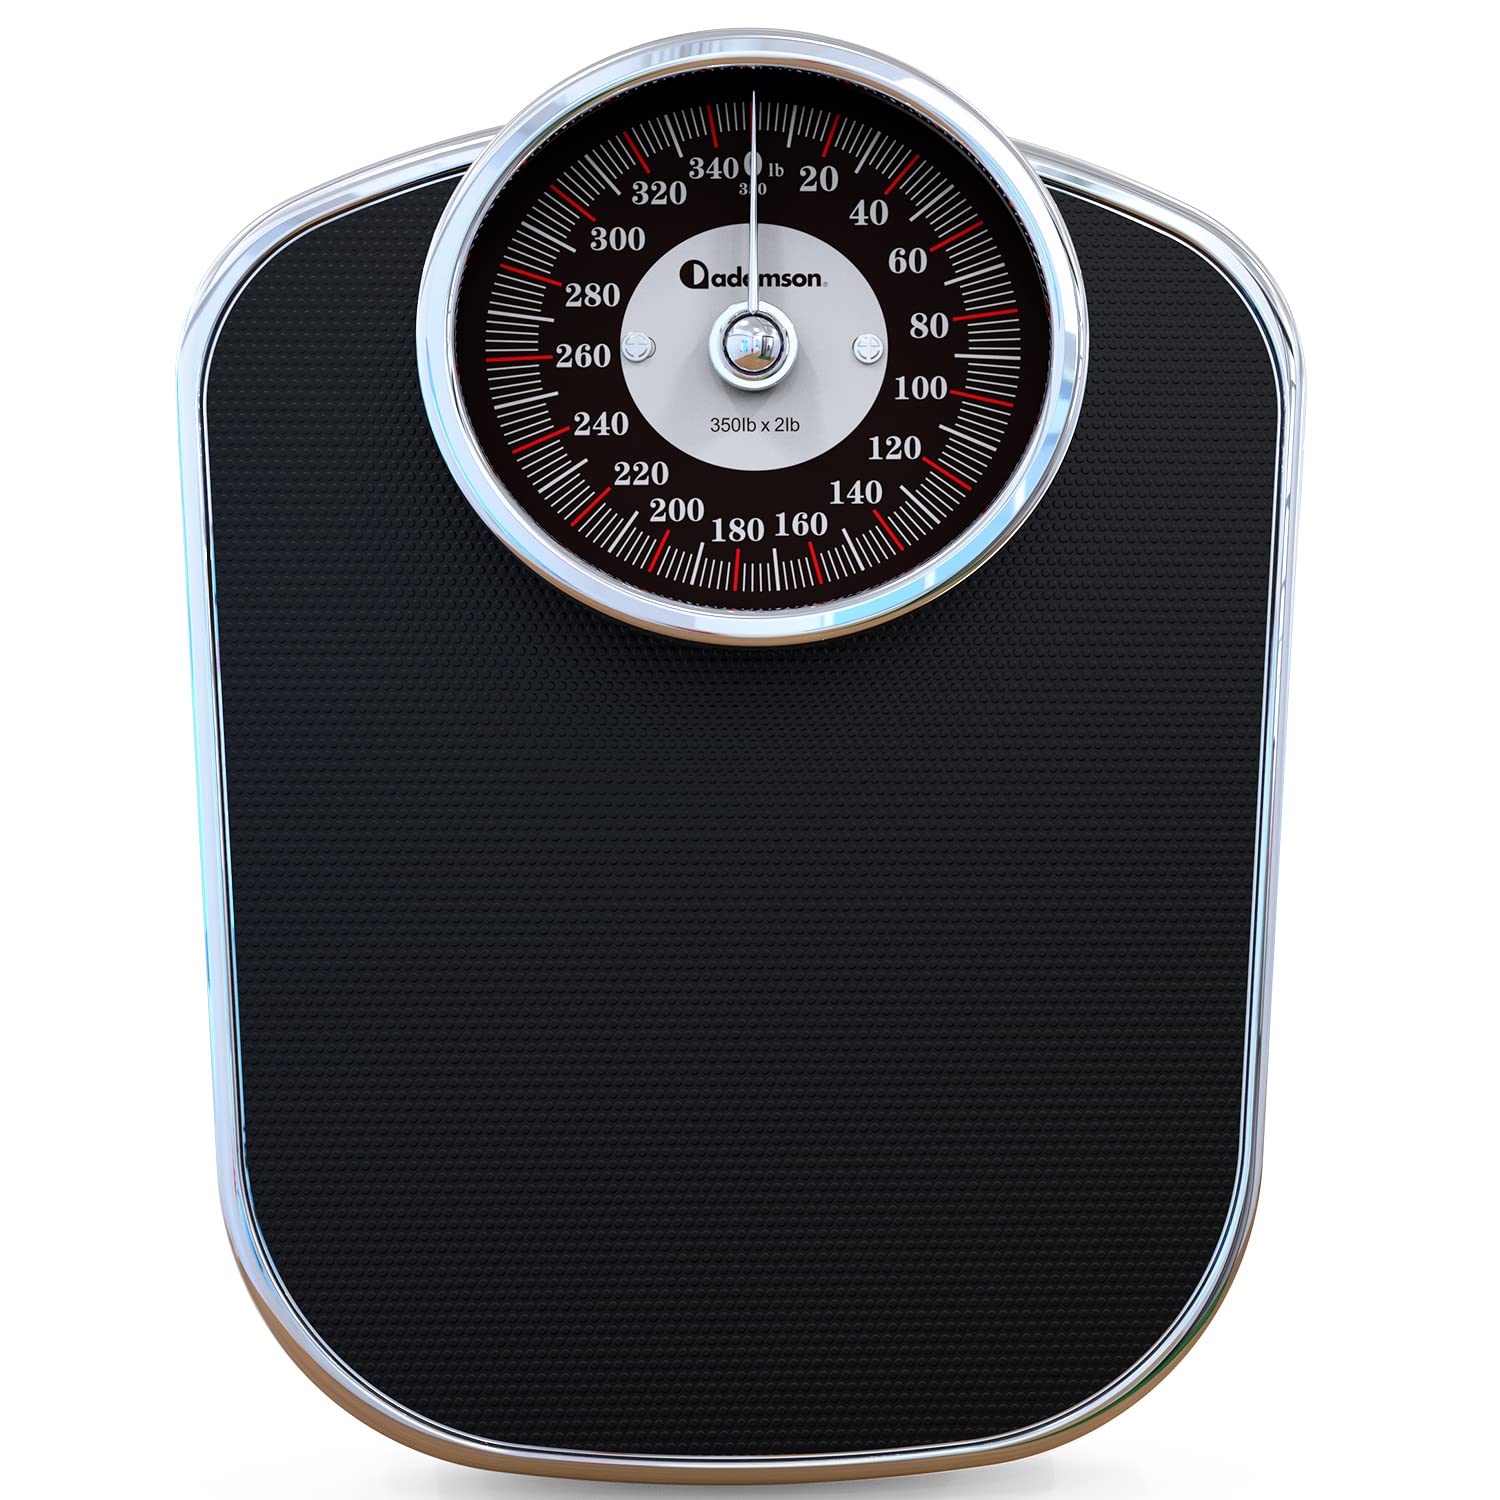 Adamson A25 Scales for Body Weight - Up to 400 lb, Anti-Skid Rubber Surface, Extra Large Numbers - High Precision Bathroom Scale